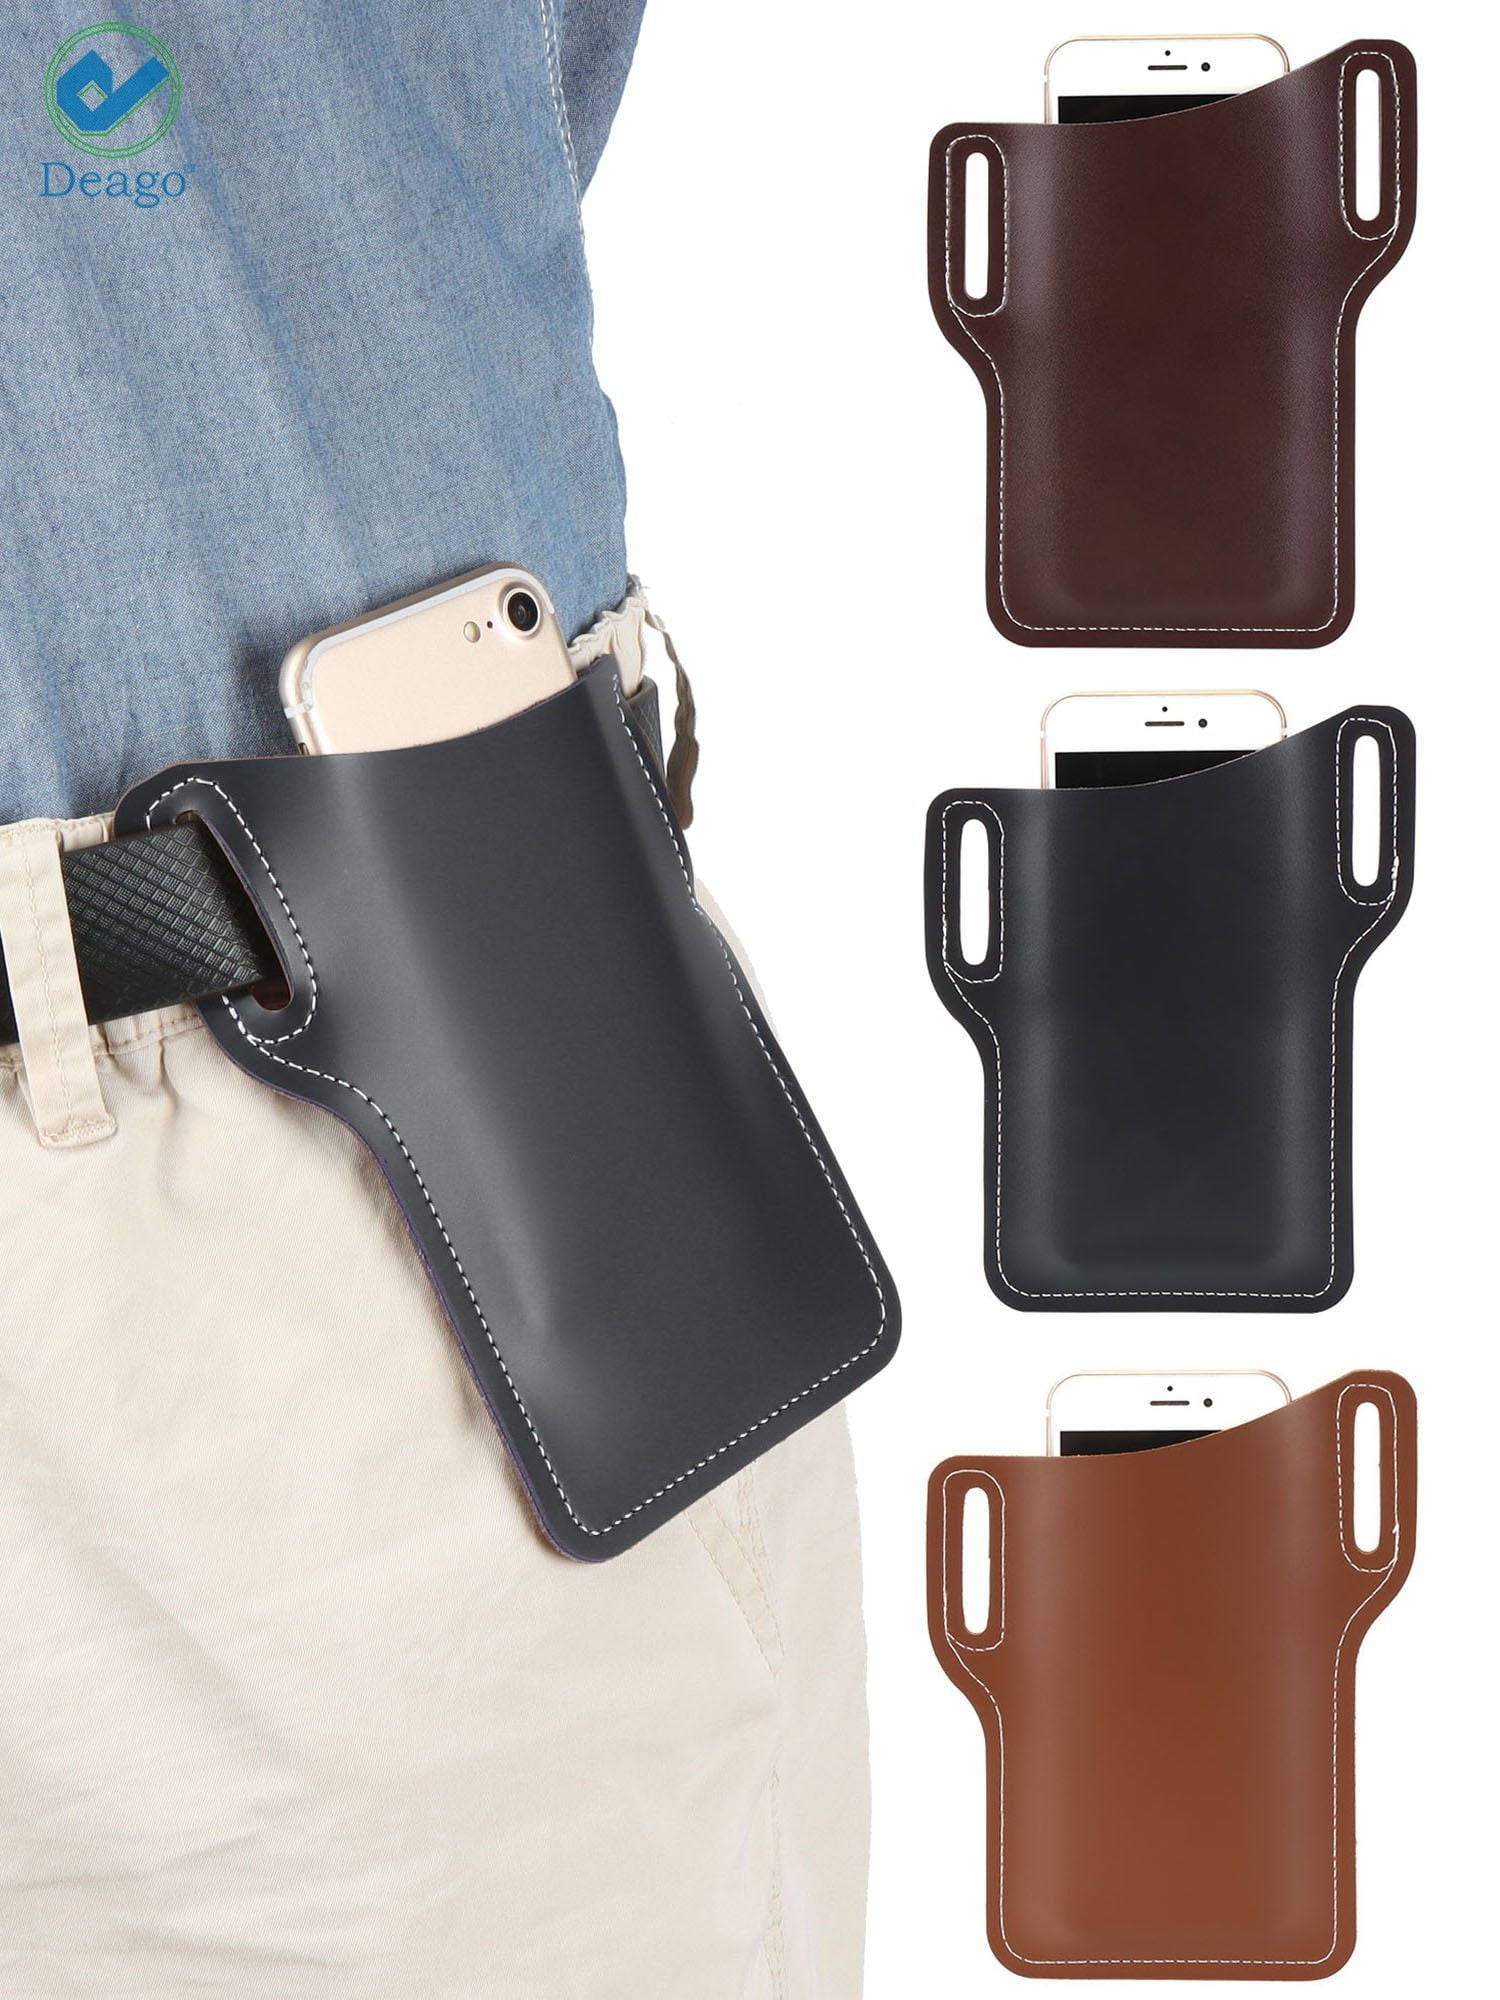 Deago Leather Cell Phone Purse Crossbody Shoulder Bags Men Belt Clip Phone Holsters Case Belt Loop Pouch Waist Bag Pack for iPhone 12 Pro Max, iPhone